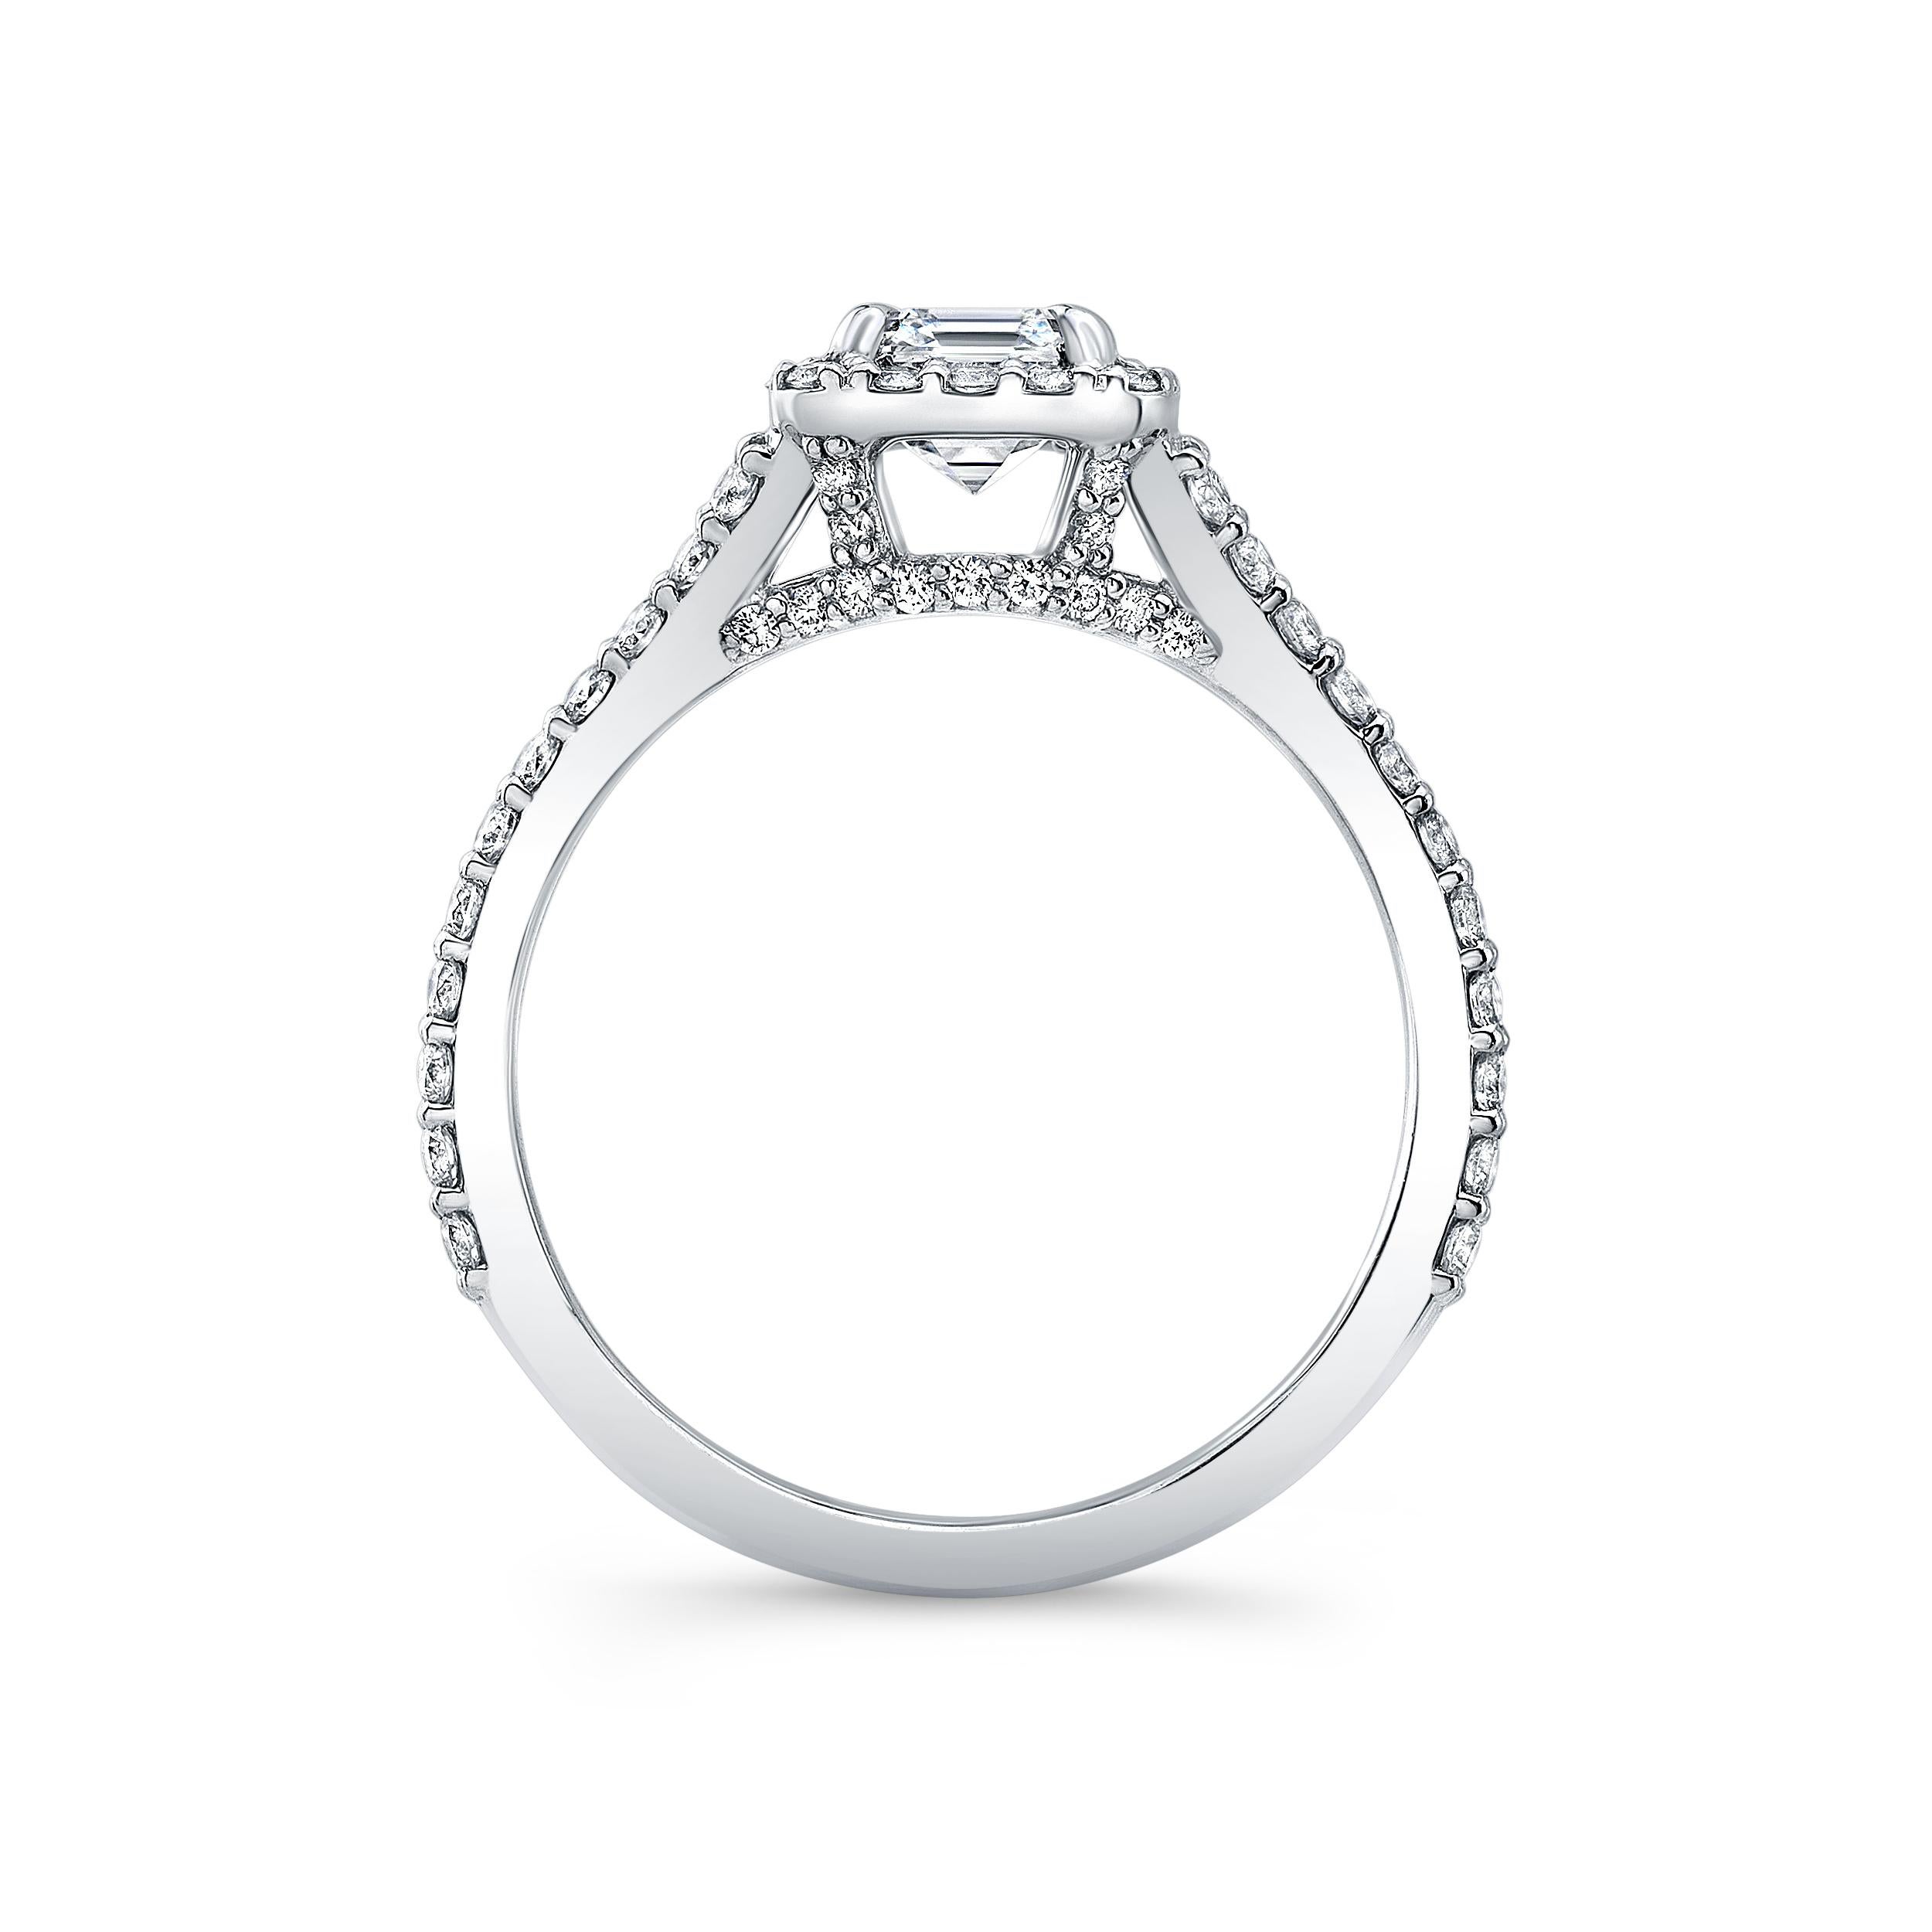 0.93 carat Asscher cut diamond set in 18k split-shank white gold pavé ring.
Approximate Color F-G Clarity SI2
pave diamonds 0.71 total weight
AGS certified
6.5 ring size